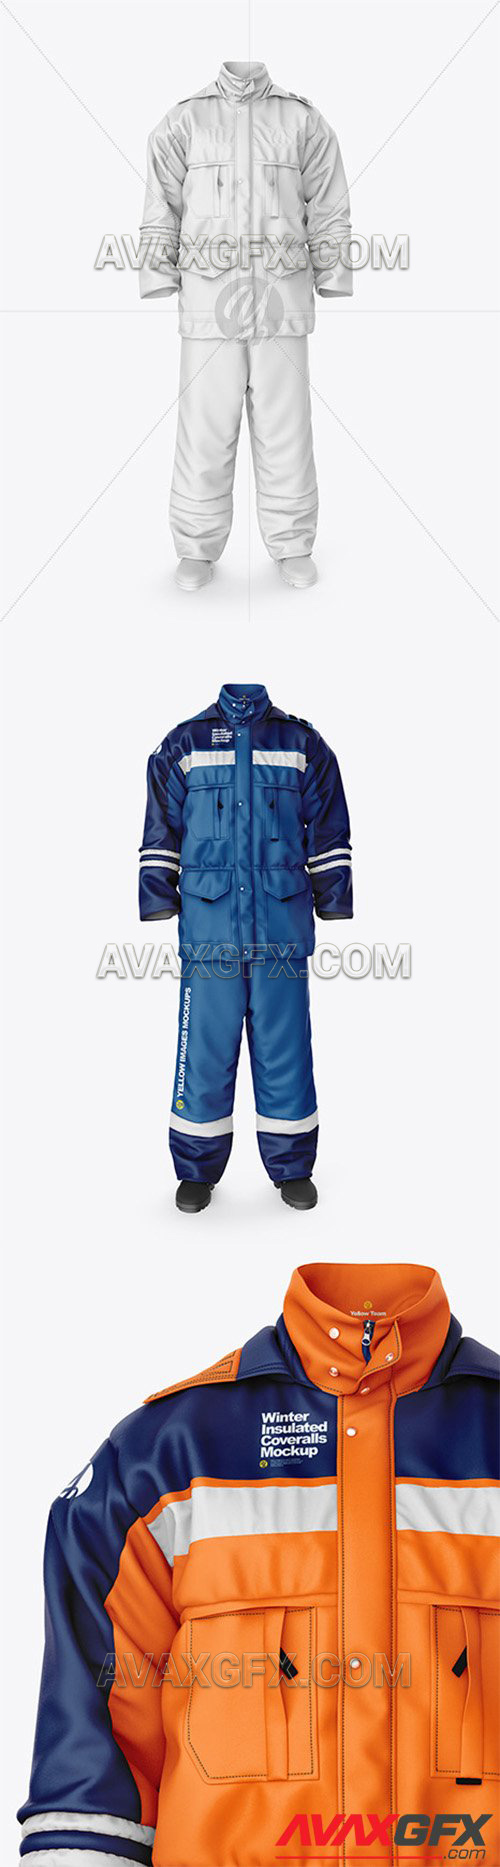 Winter Insulated Coveralls Mockup – Front View 57860